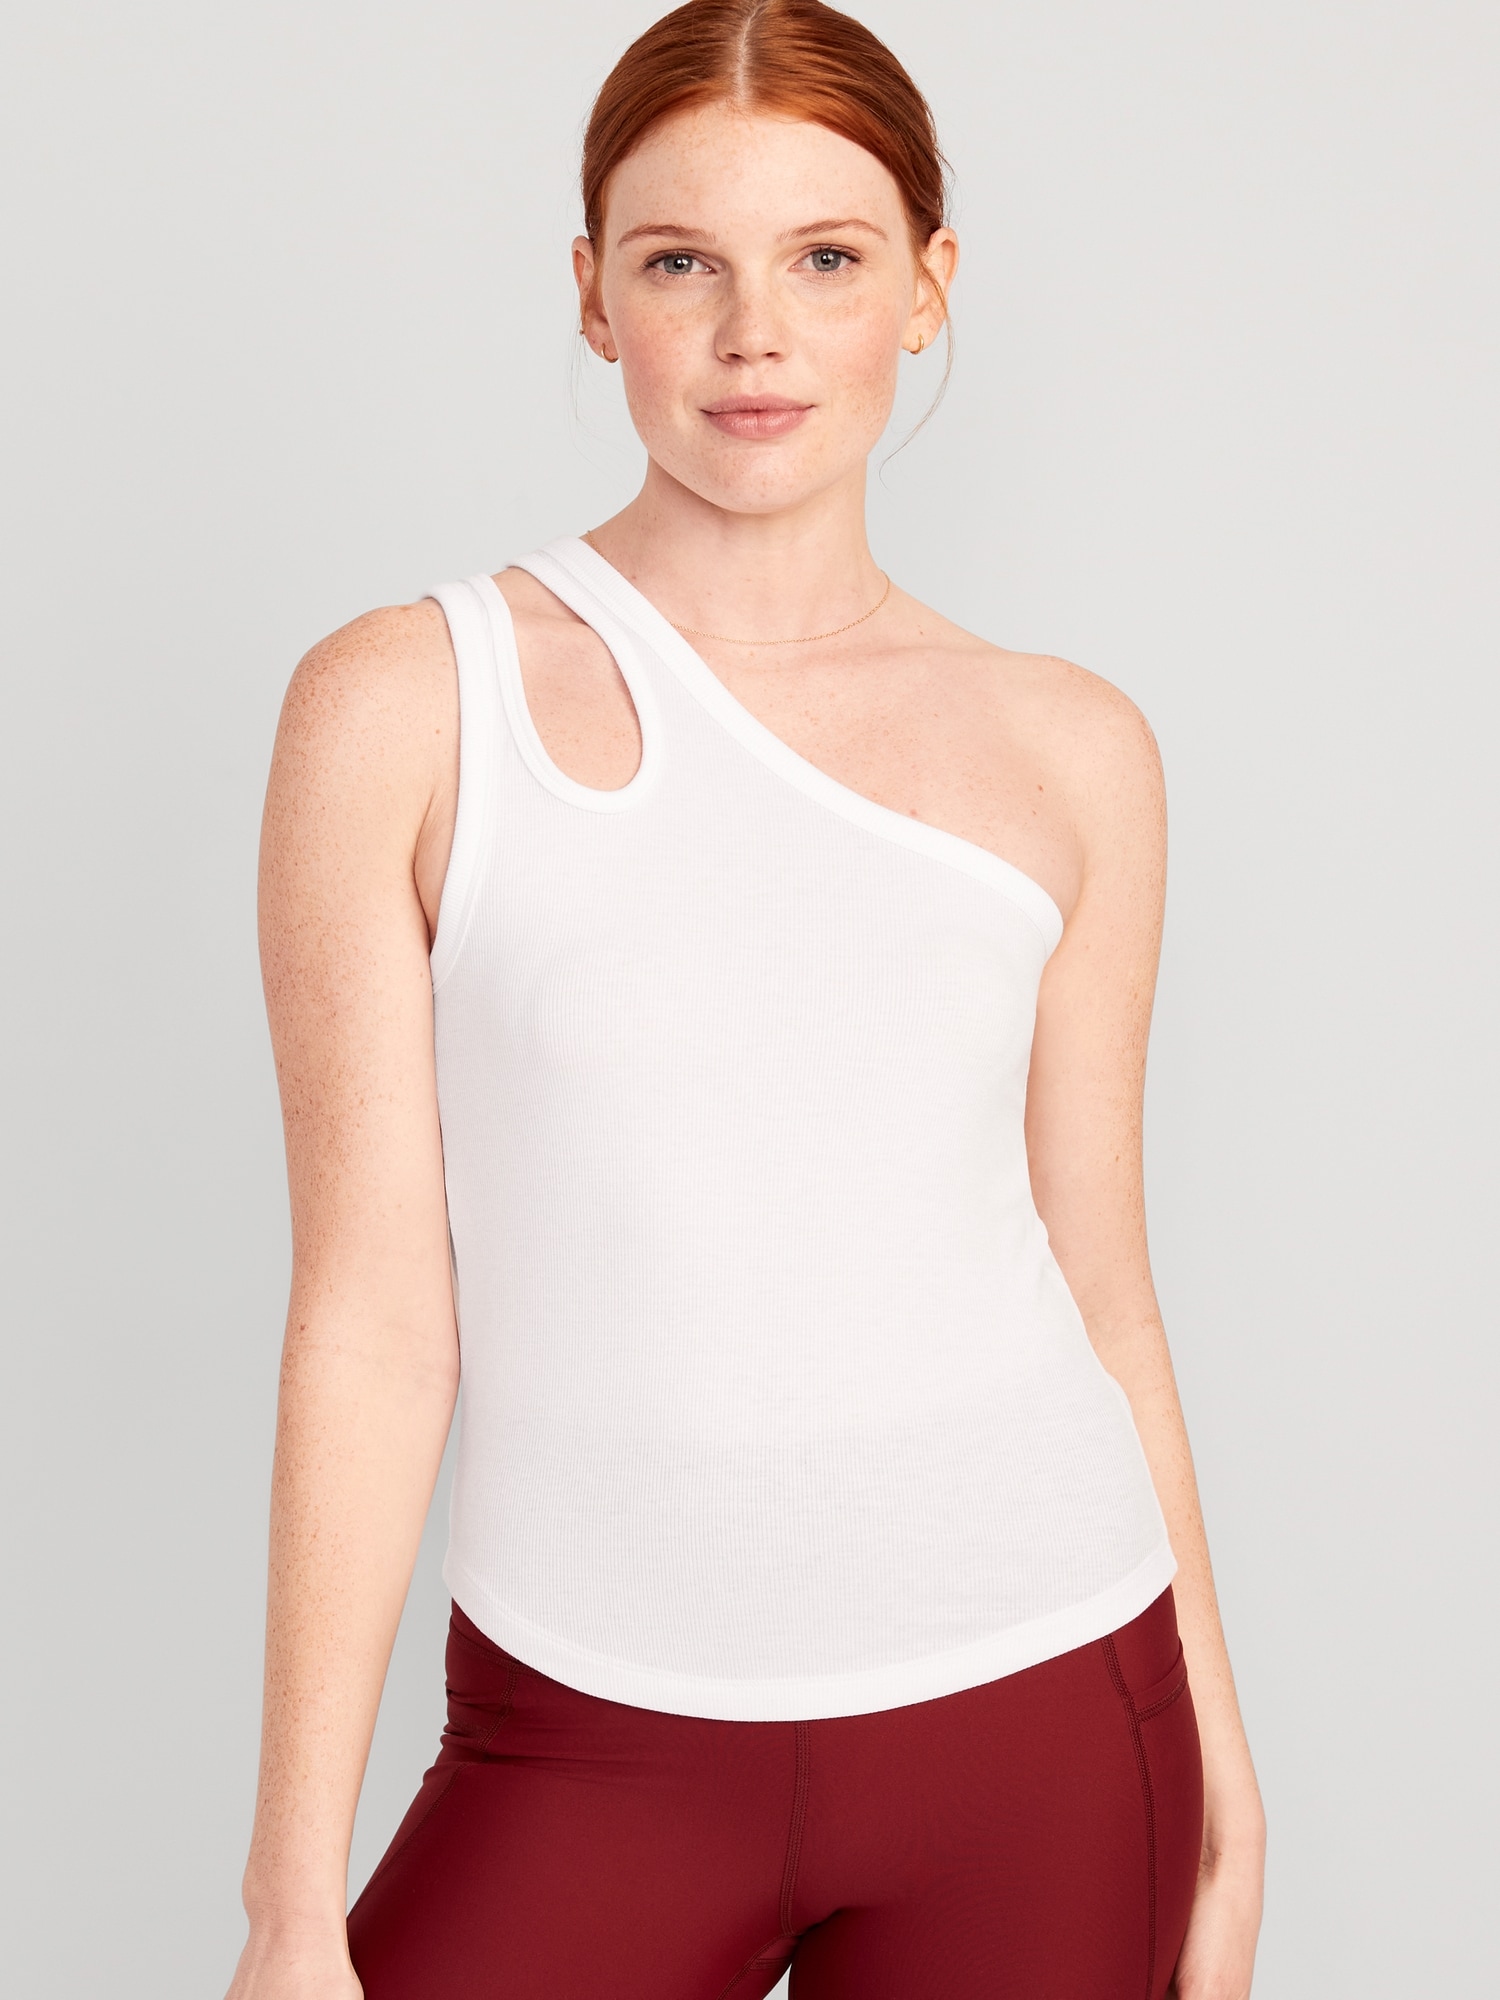 Old Navy UltraLite All-Day One-Shoulder Cutout Tank Top for Women white. 1